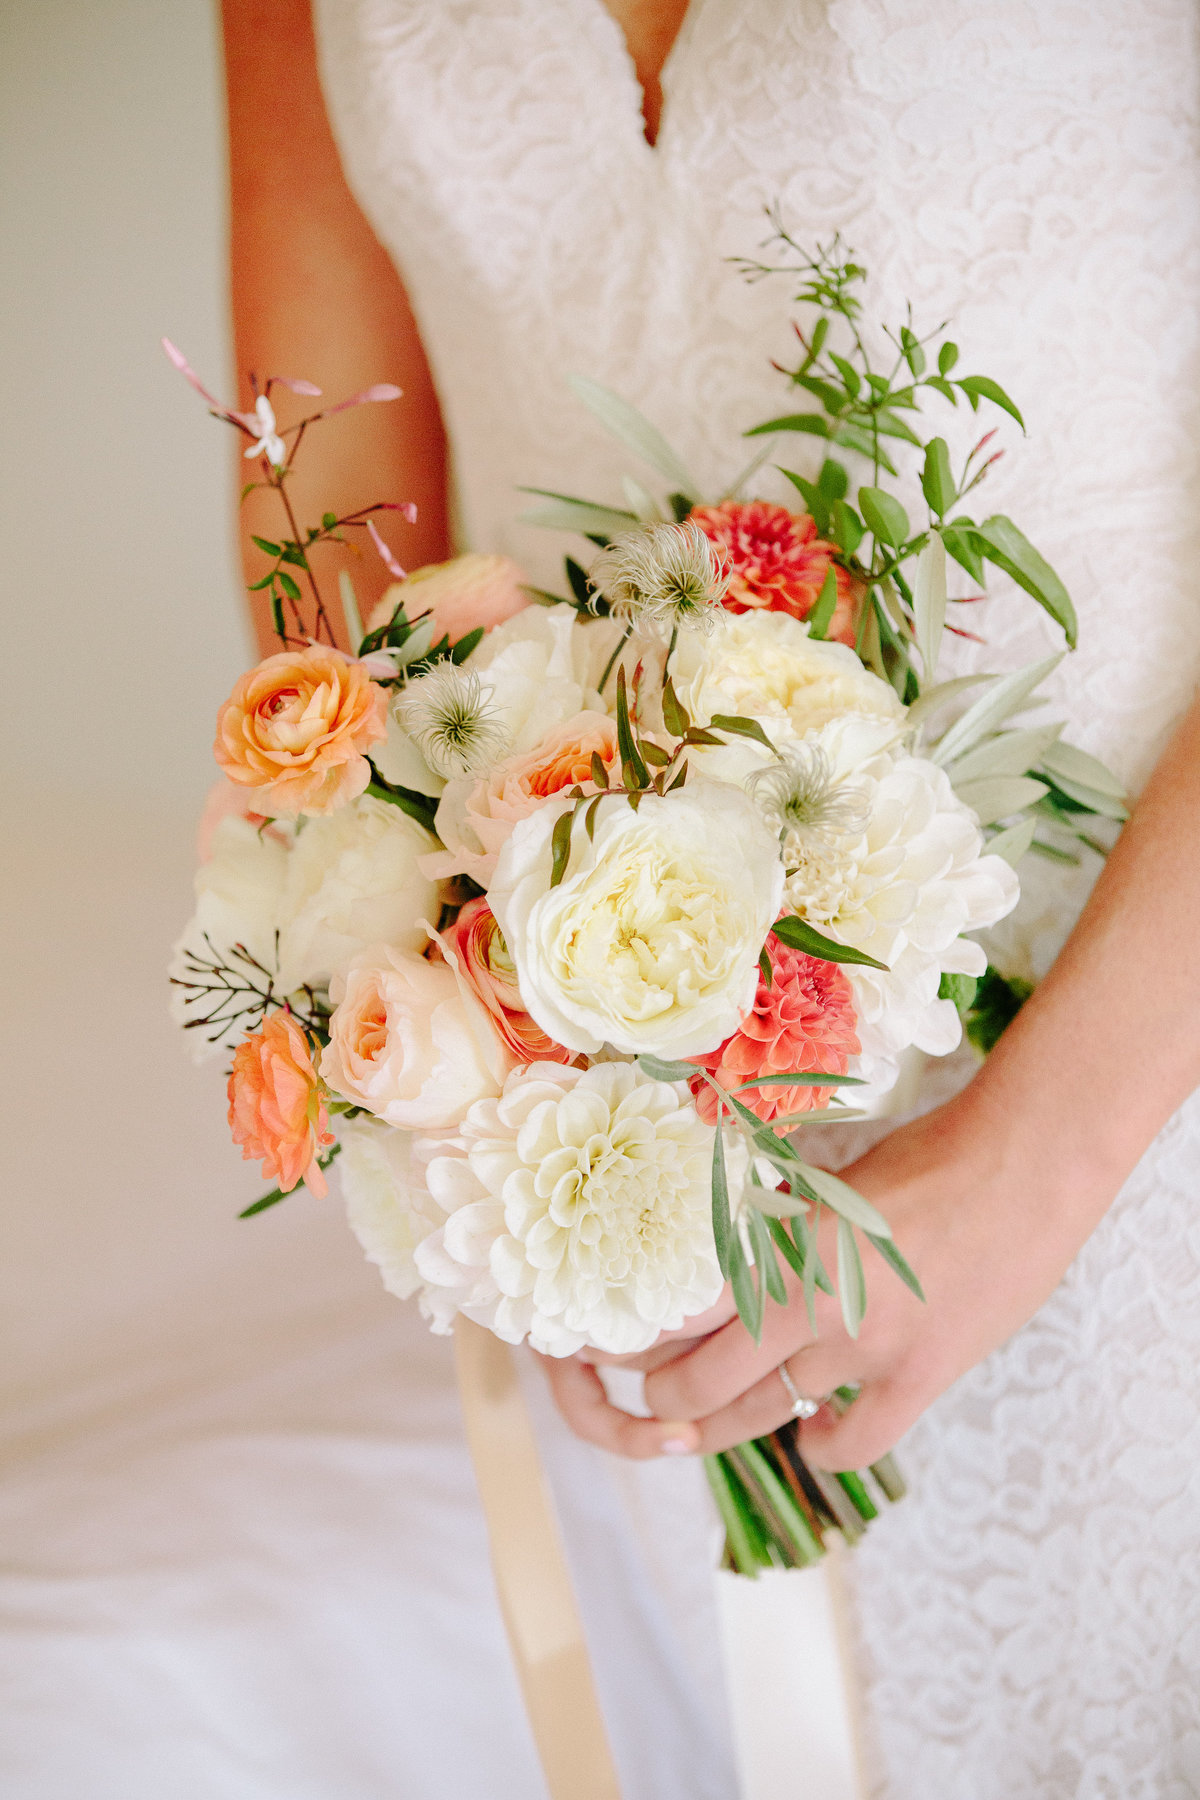 Peach and white bridal bouquet for a wedding at Beltane Ranch in Sonoma.